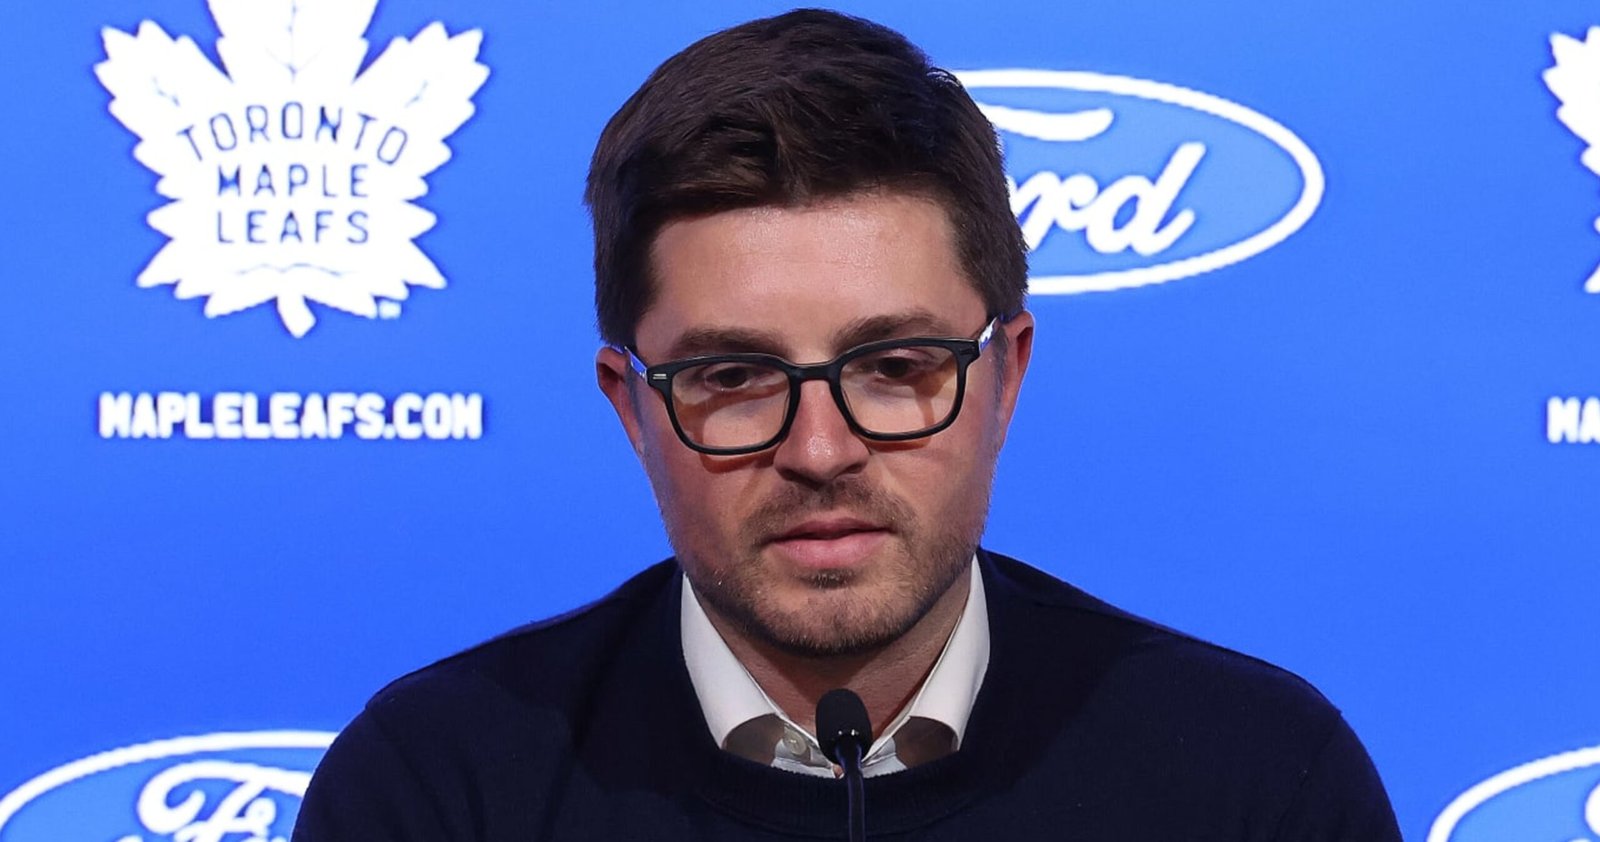 Kyle Dubas Employed as Penguins’ President of Hockey Operations After Maple Leafs Exit